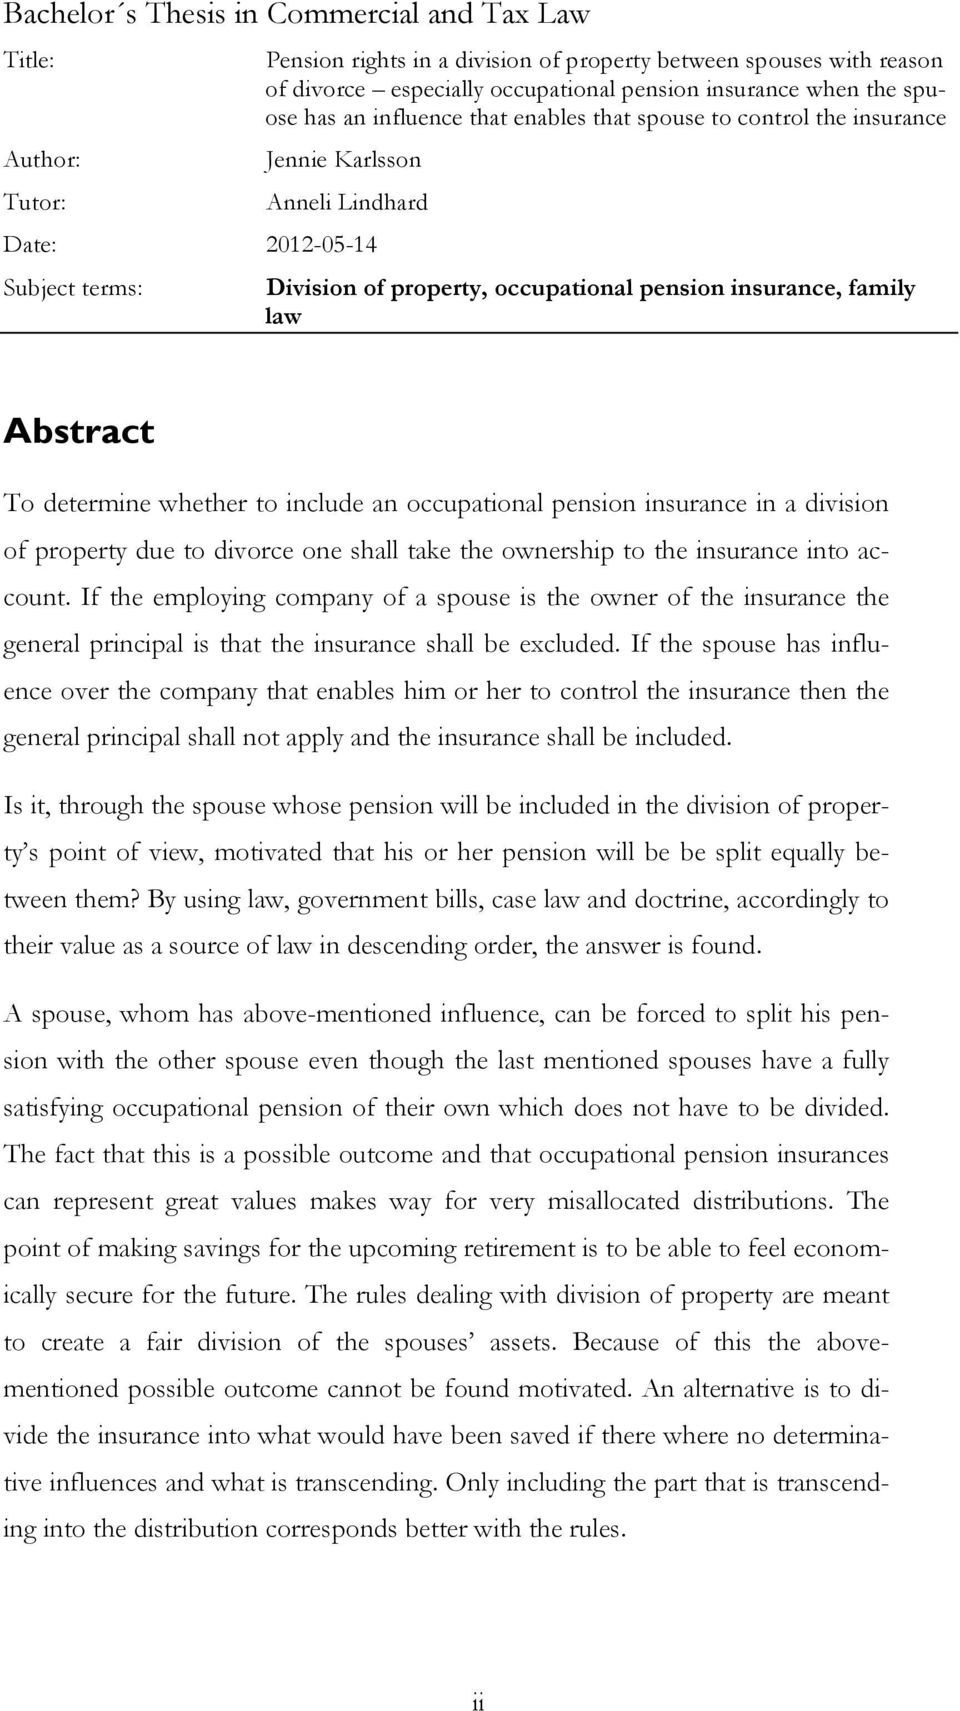 law Abstract To determine whether to include an occupational pension insurance in a division of property due to divorce one shall take the ownership to the insurance into account.